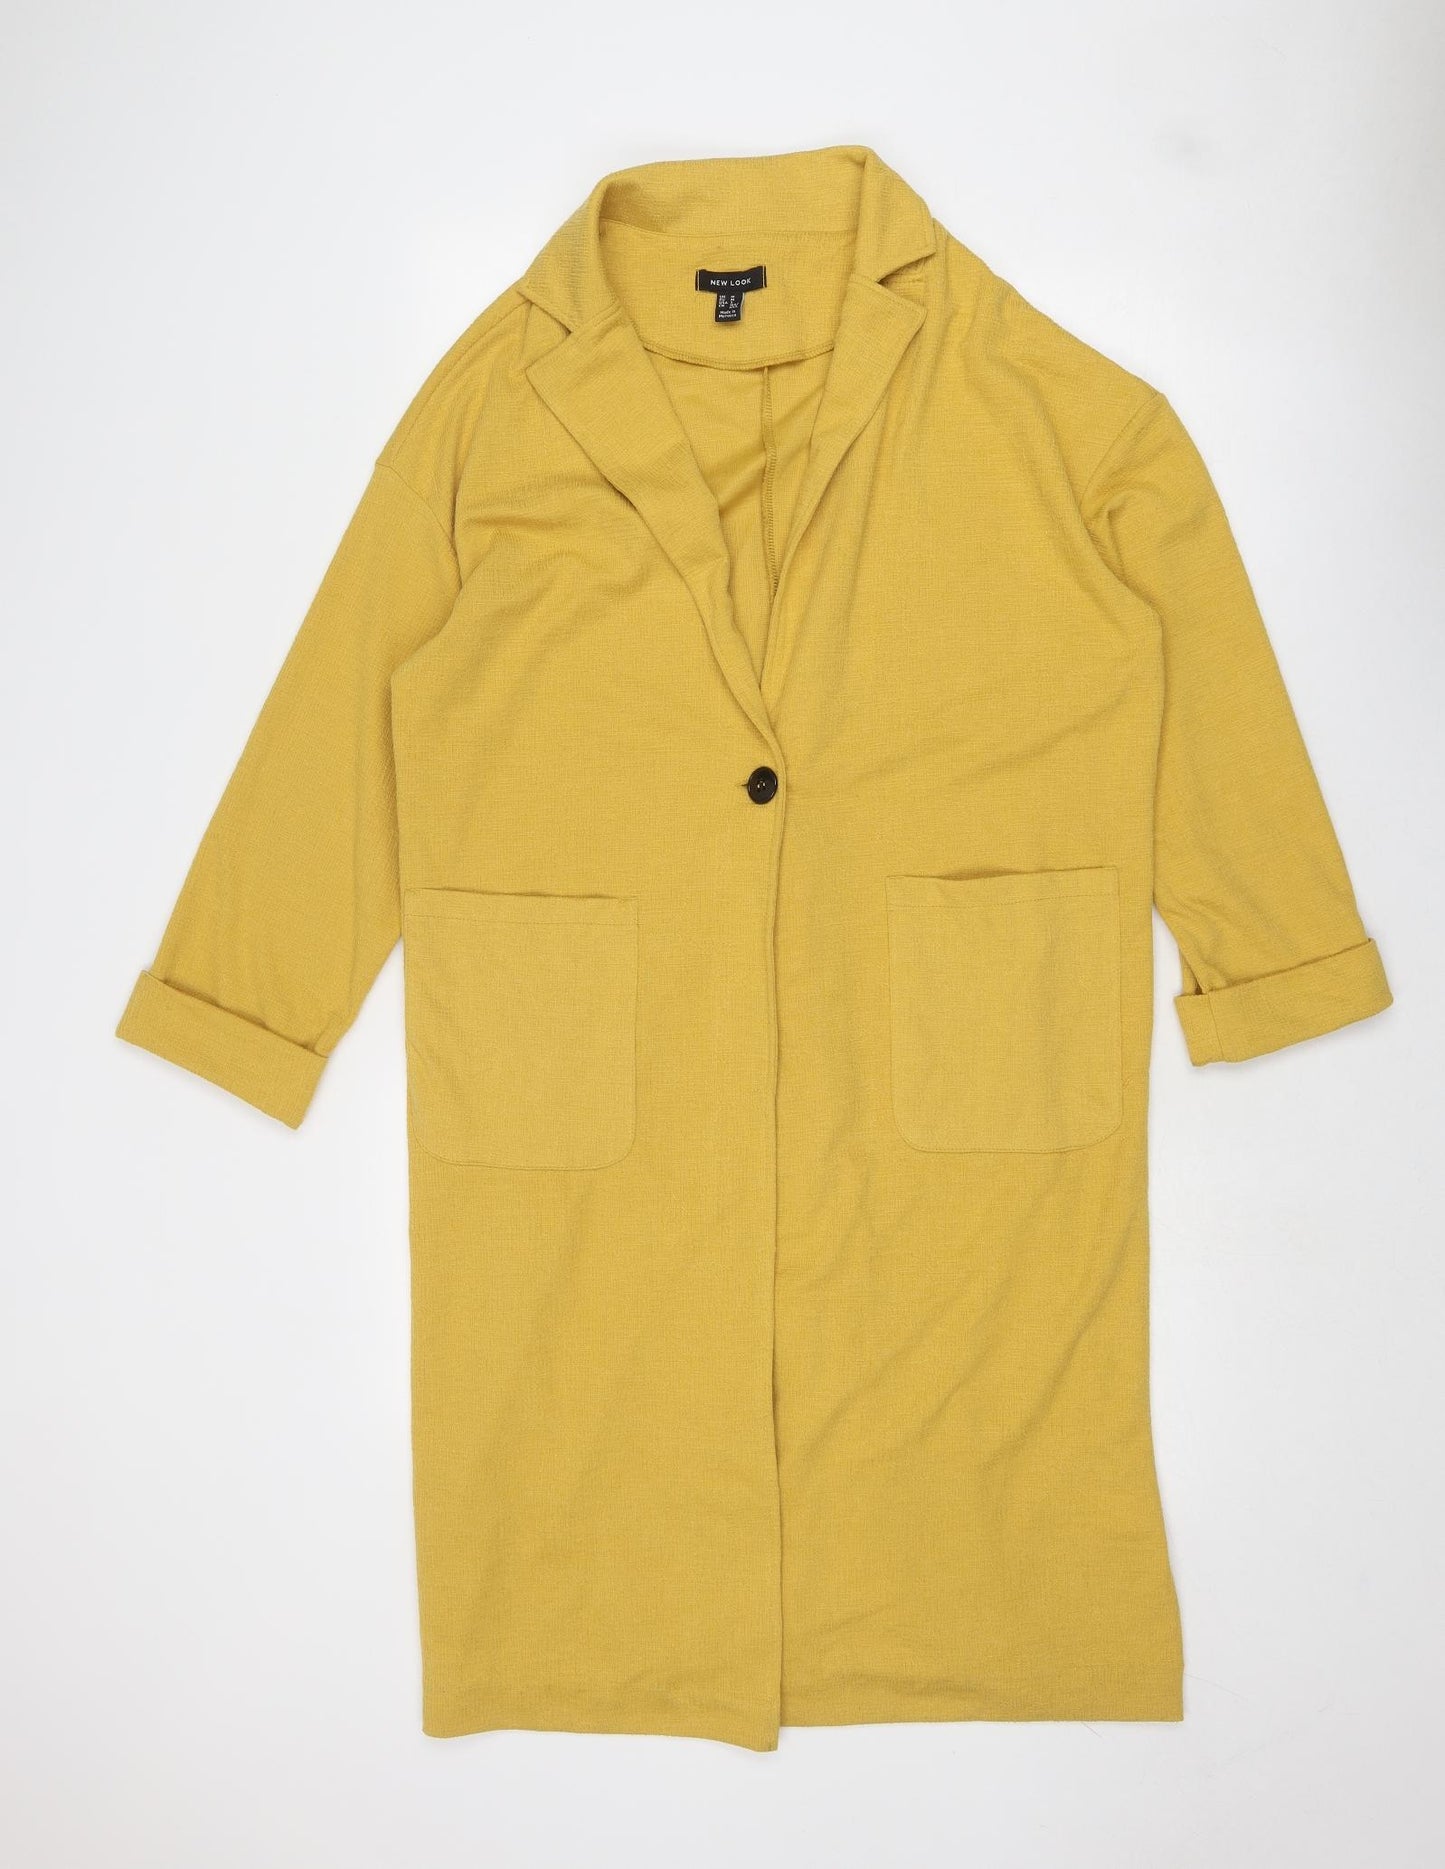 New Look Womens Yellow Overcoat Coat Size M Button